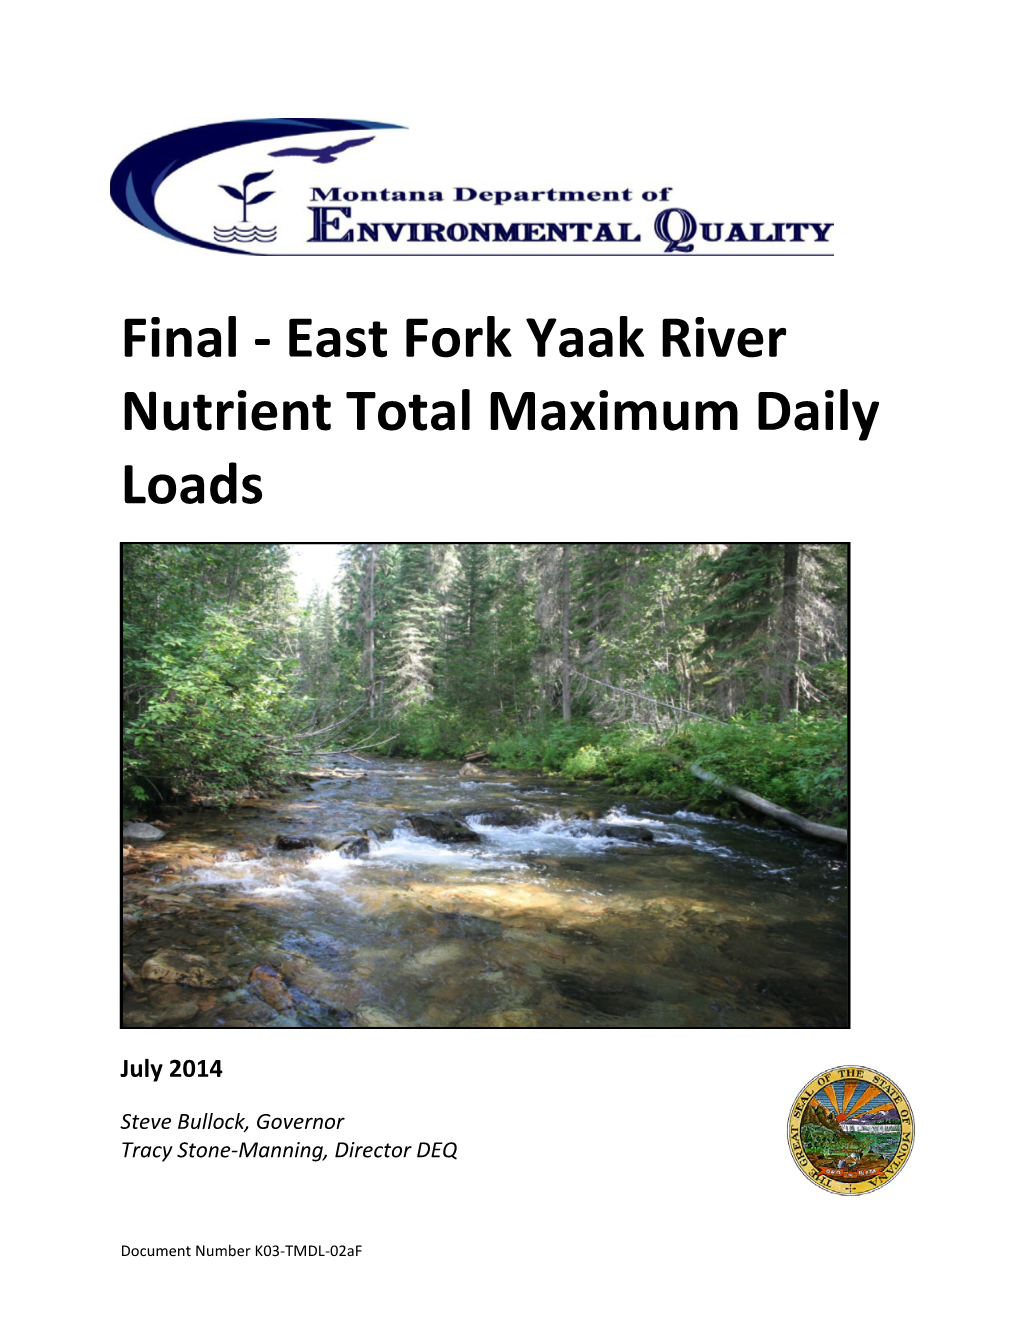 East Fork Yaak River Nutrient Total Maximum Daily Loads